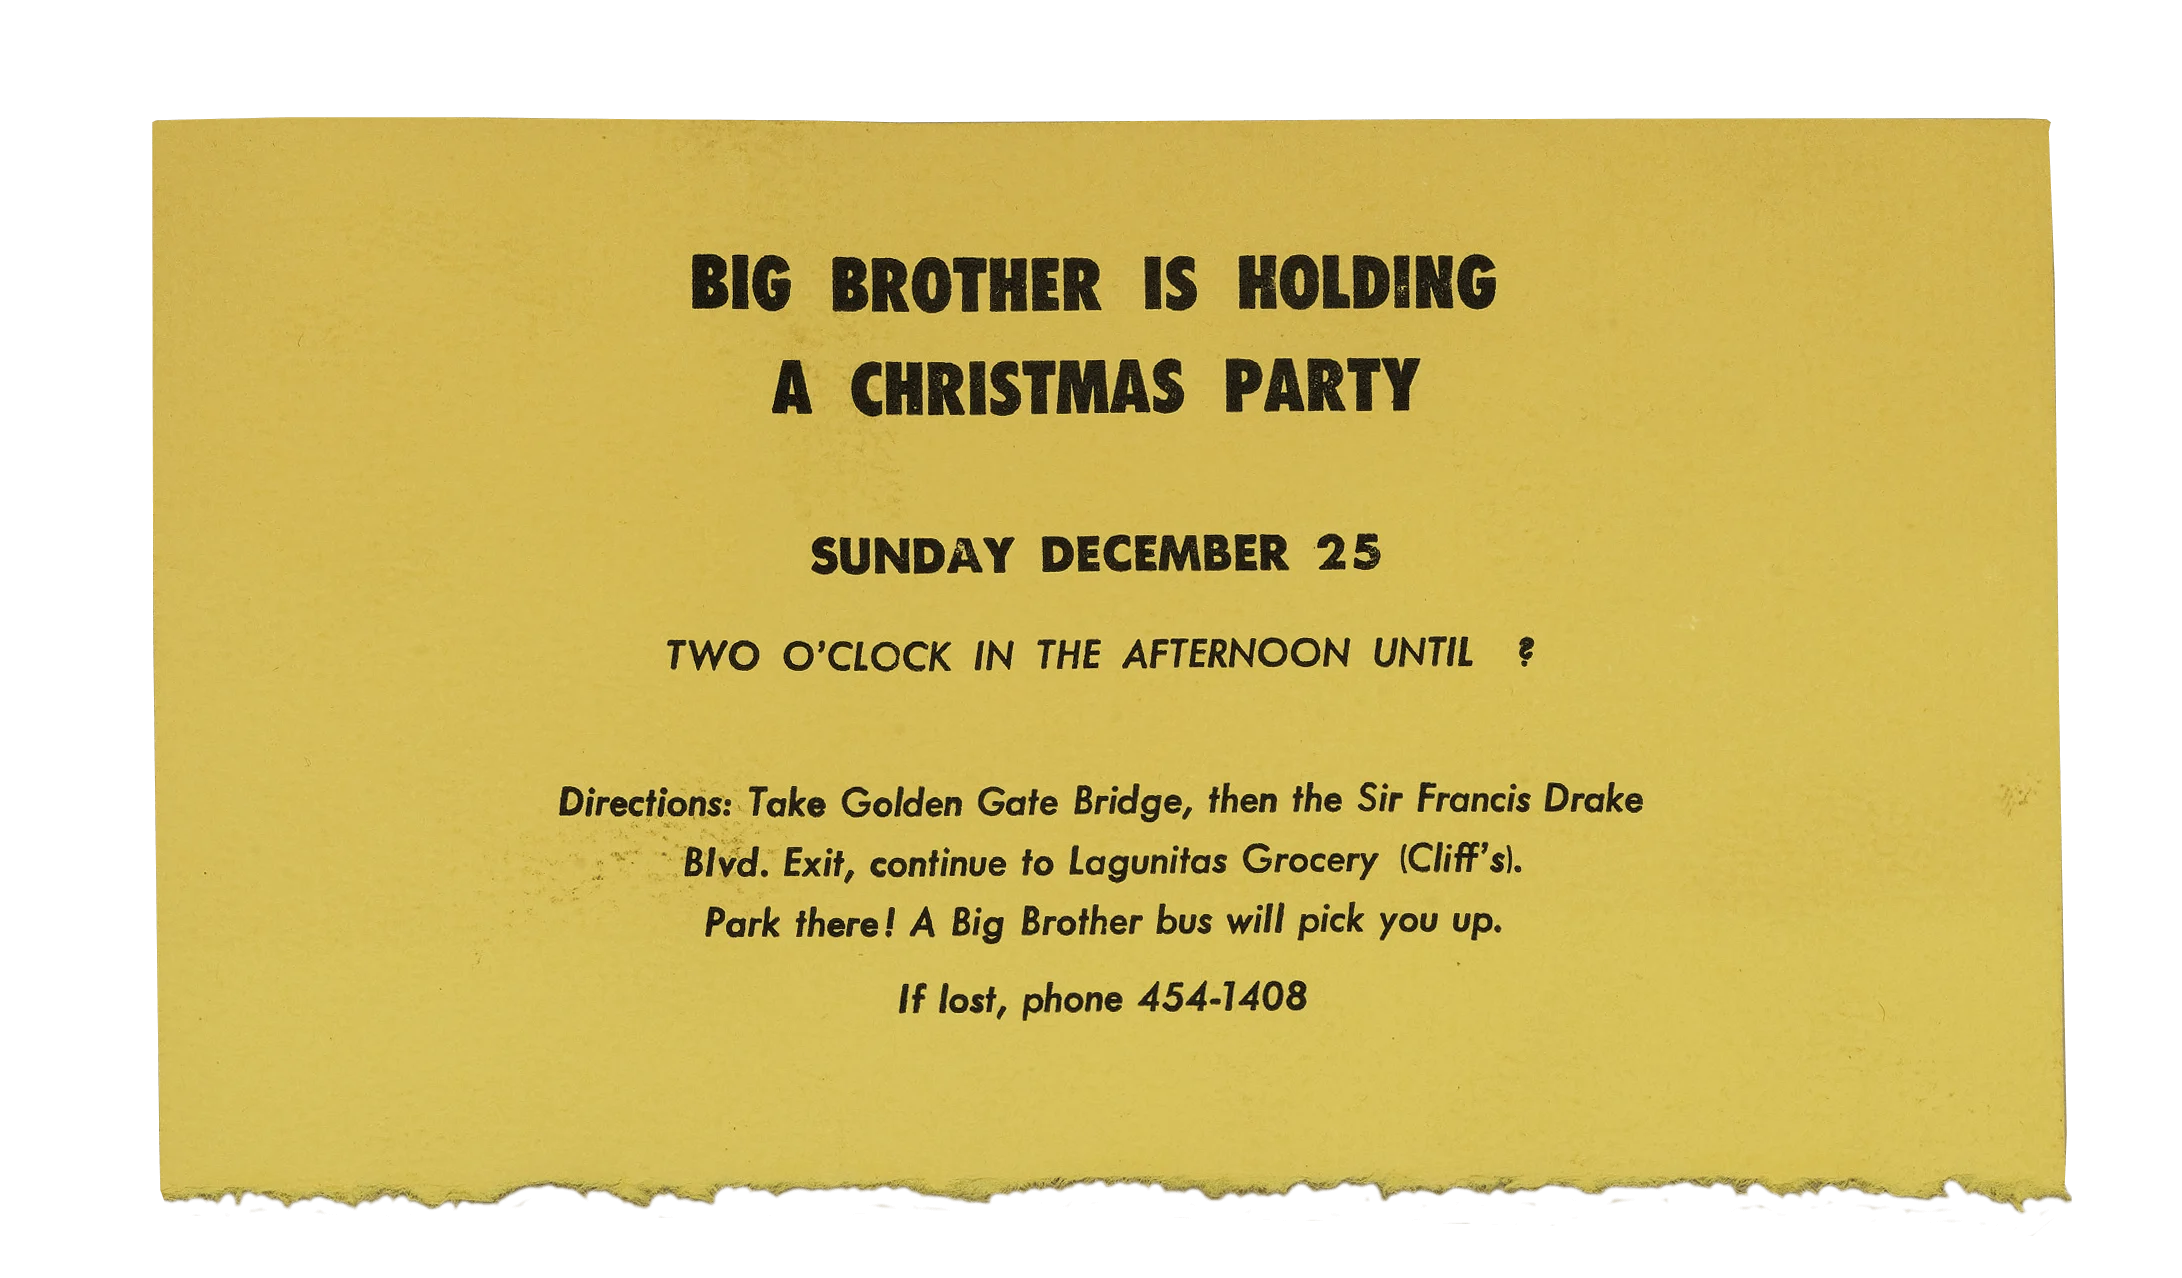 Big Brother Christmas party invitation. Copyright © Fantality Corp.